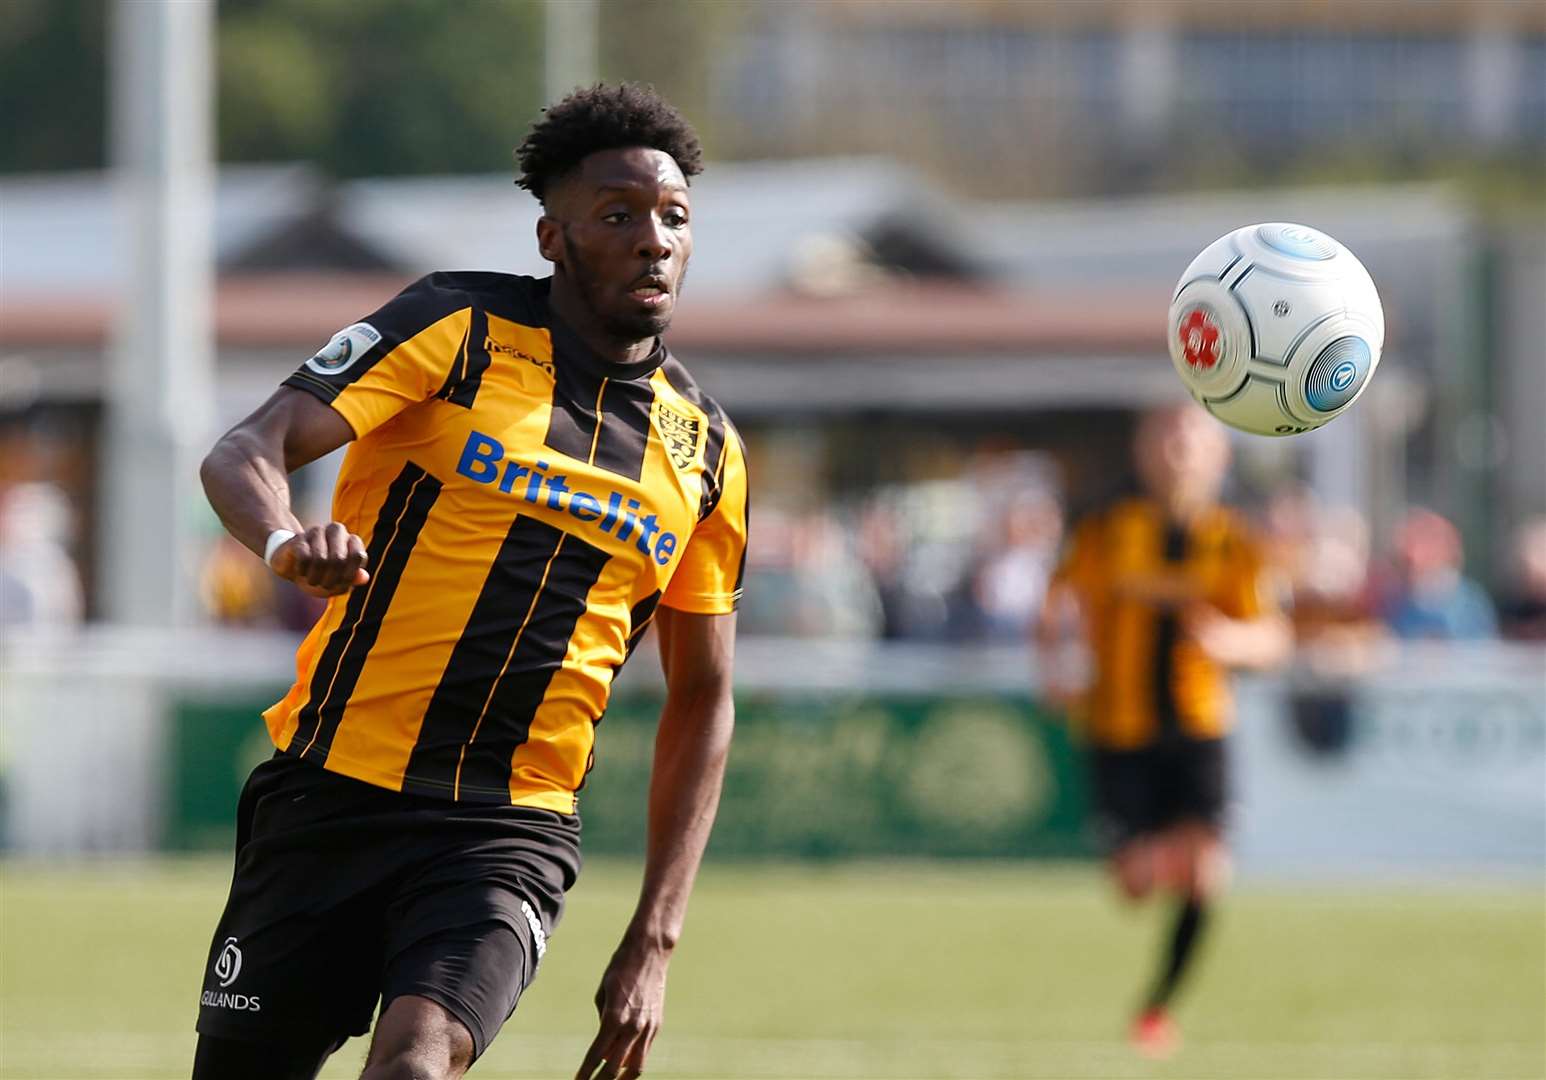 Blair Turgott's penalty gave Maidstone the lead at Chester Picture: Andy Jones